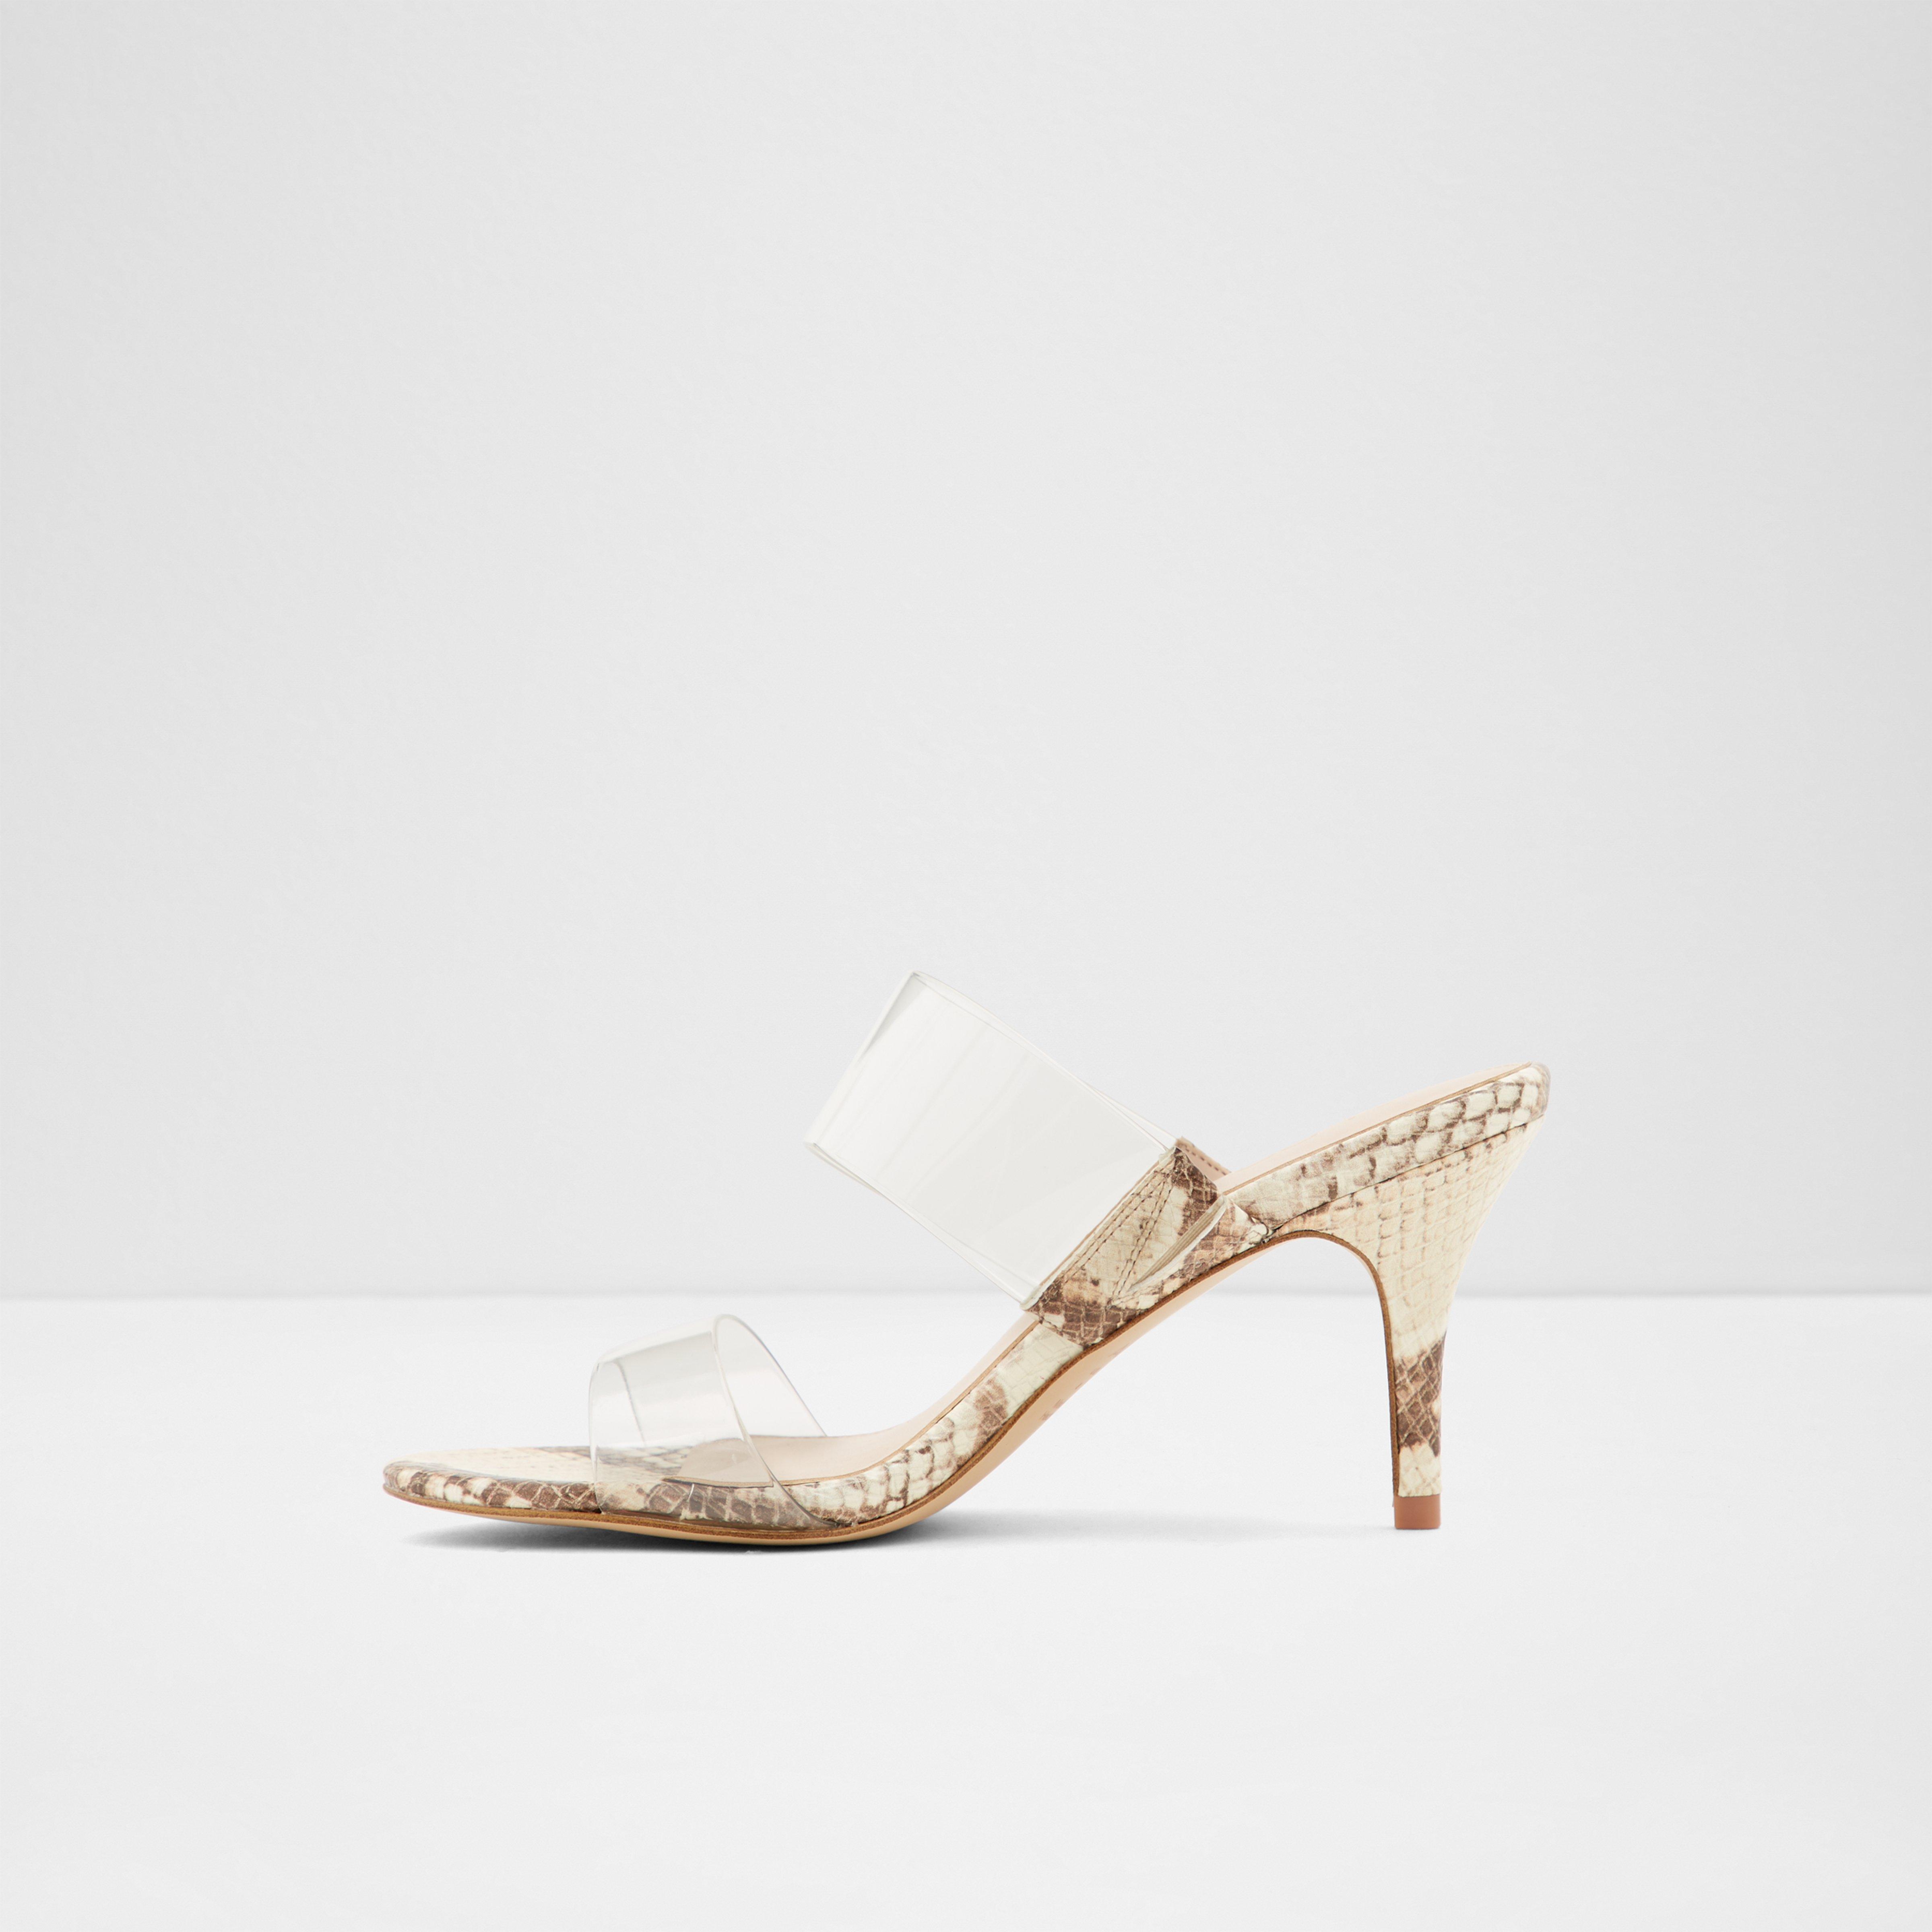 ALDO Synthetic Tudith in Beige/Taupe 